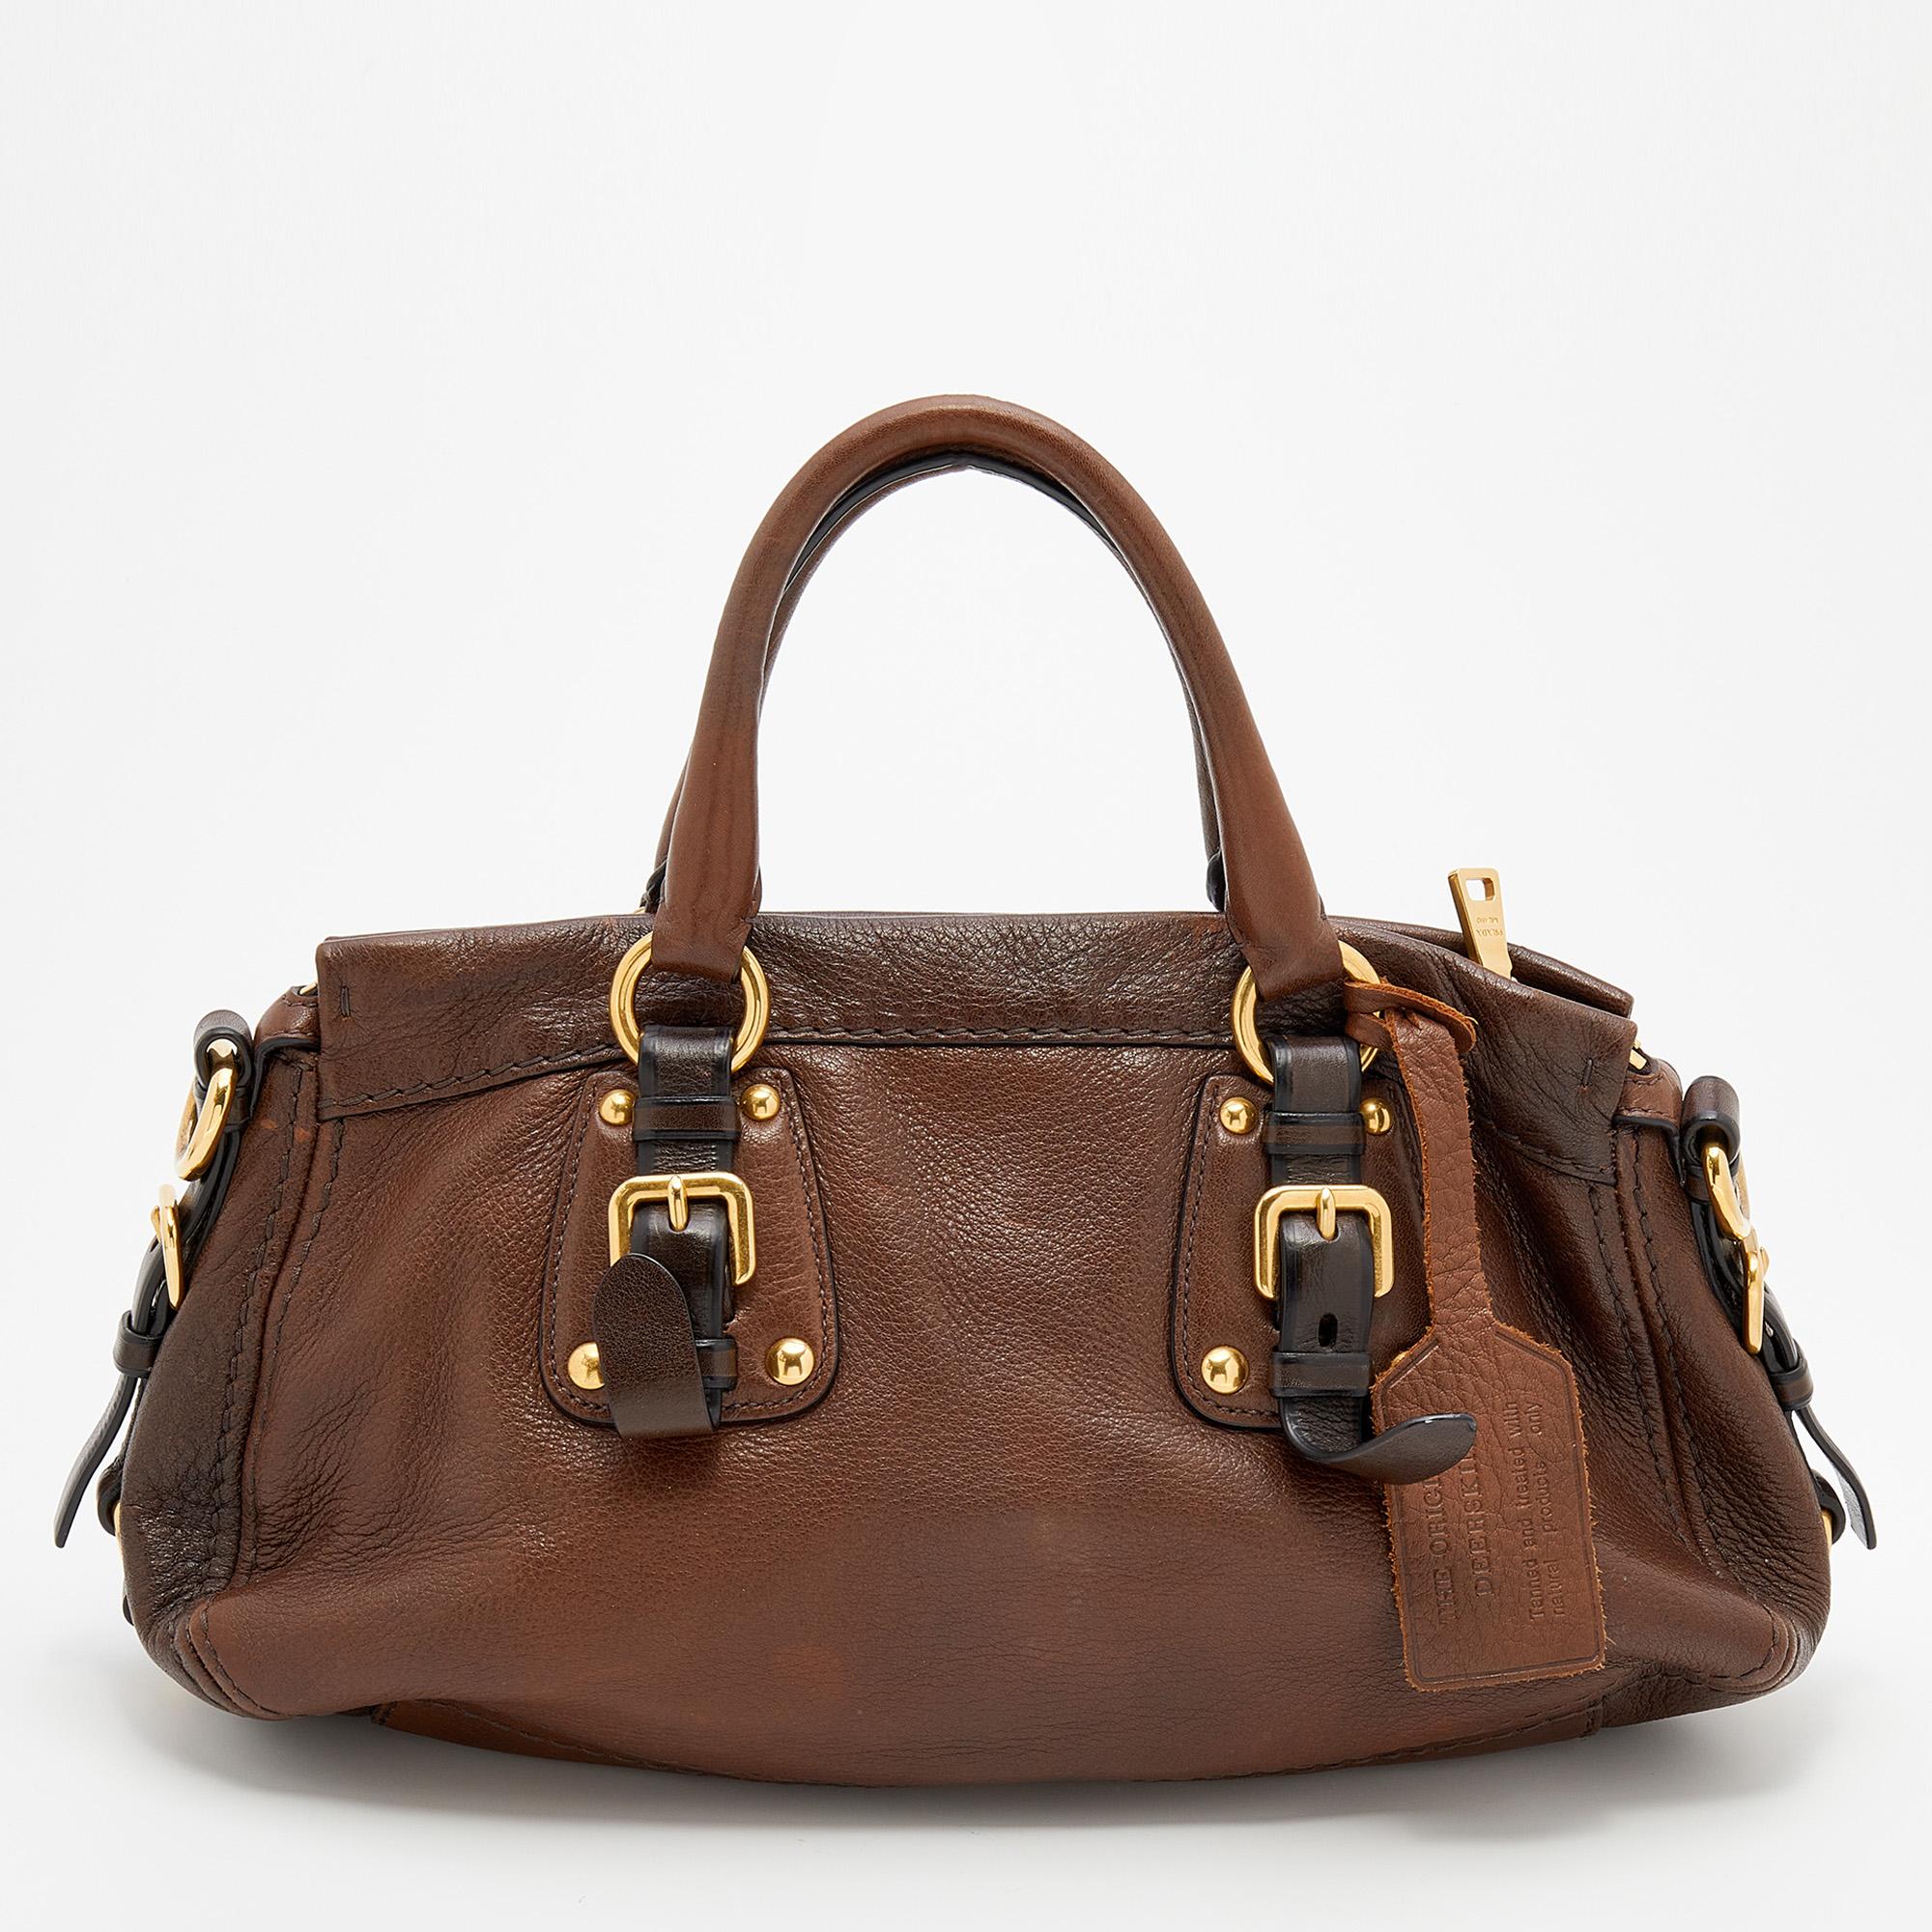 Carry this chic satchel from Prada for all your casual outings! It is made from leather and features a classic dark brown shade with gold-tone hardware. It is complete with dual handles, a shoulder strap, and a spacious interior for your